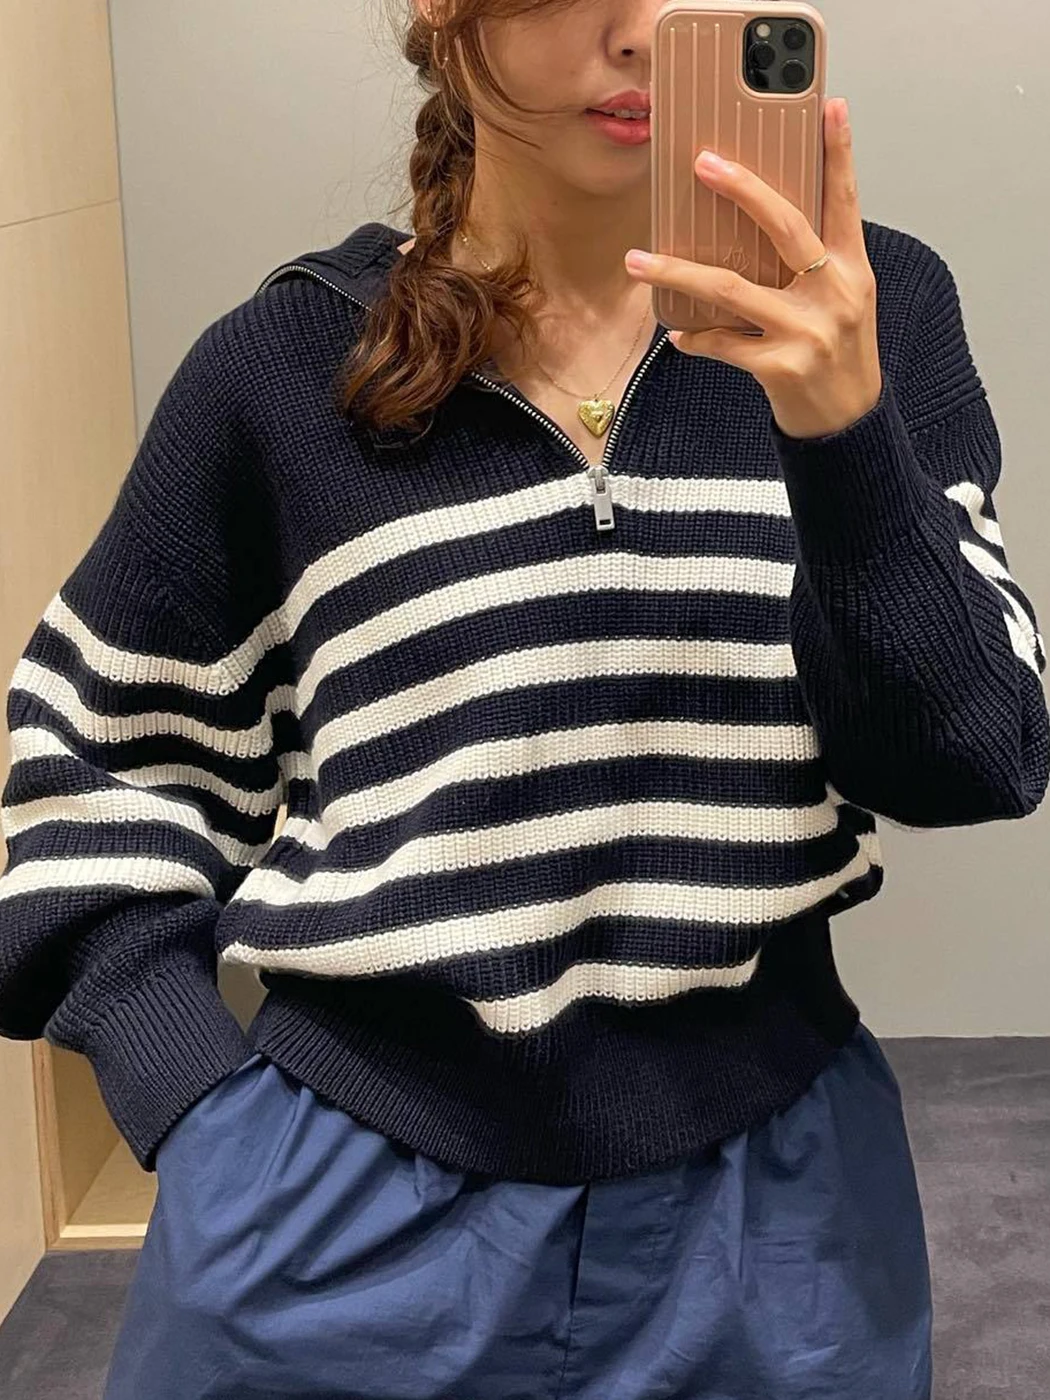 Ribbed Stripes Half-Zip Sweater Women 2022 Autumn Mock Neck Knitted Pullovers Jumpers Femme Fashion Streetwear Sweater Tops